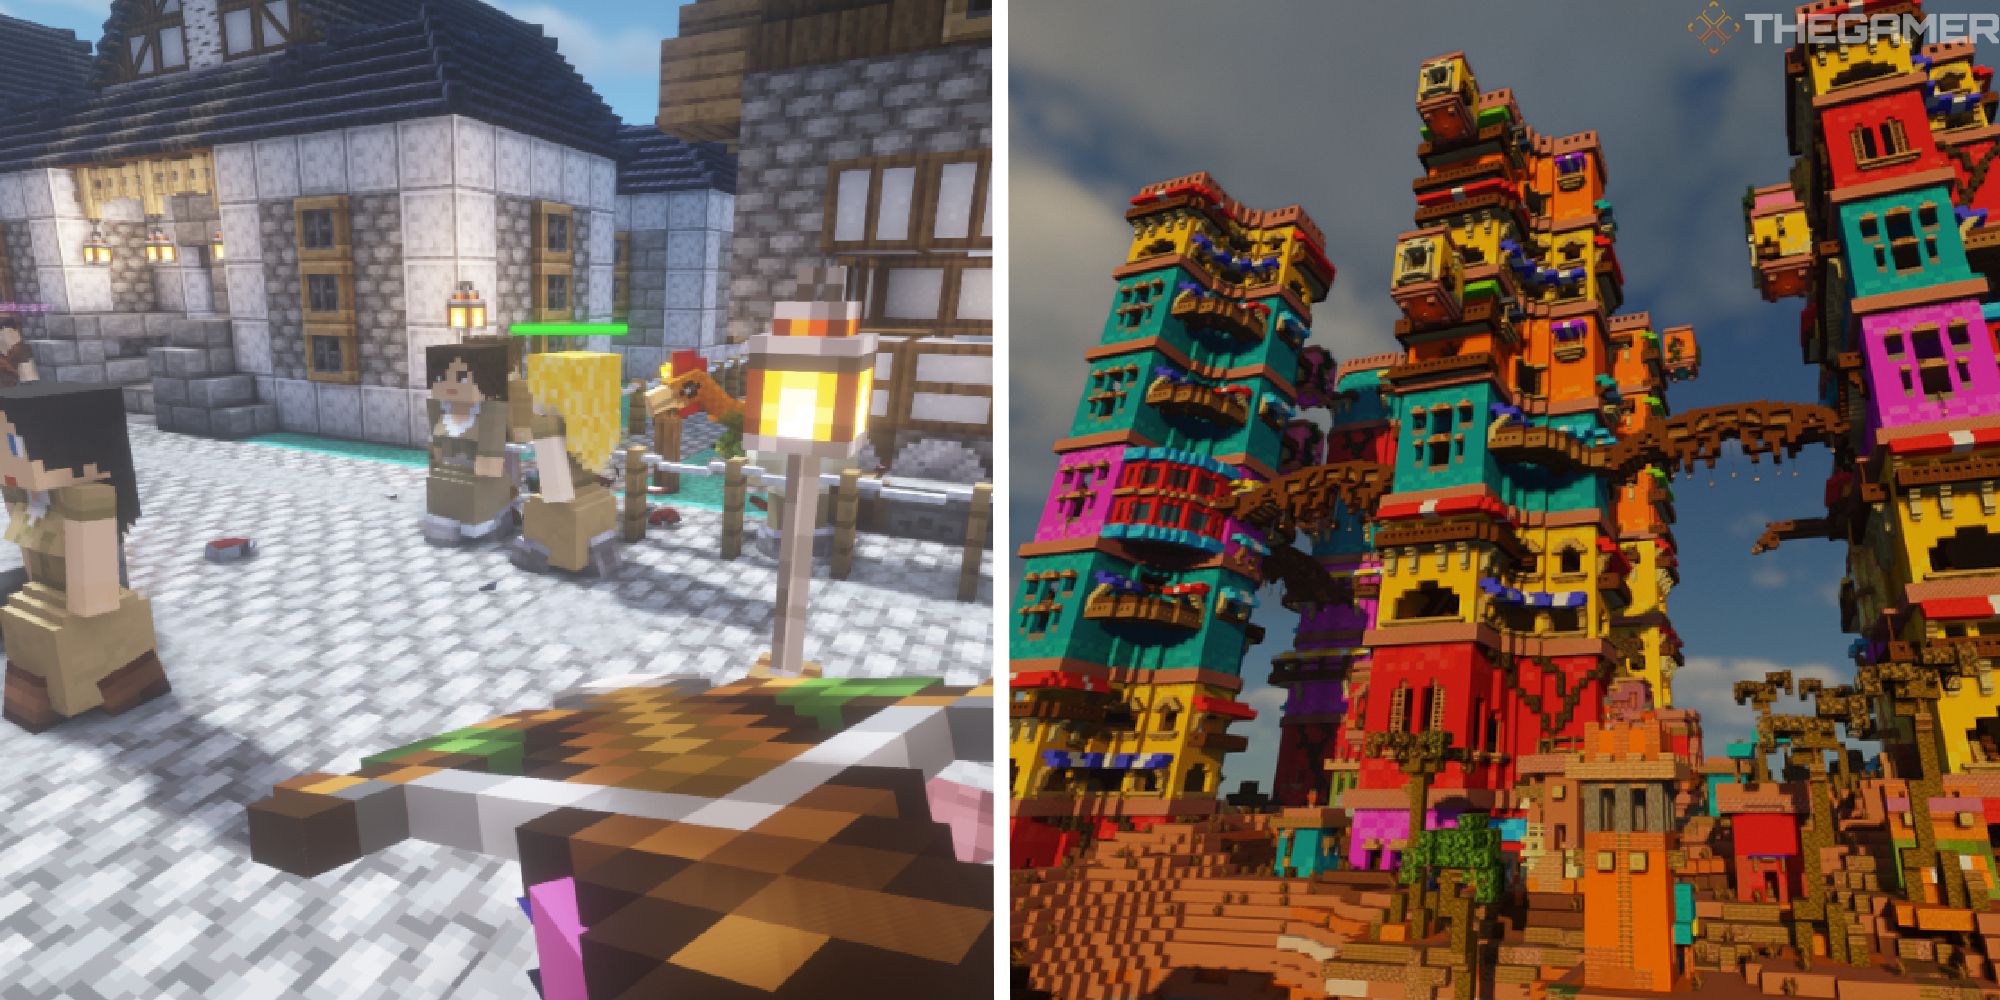 Top 5 mods to turn Minecraft into a fantasy game